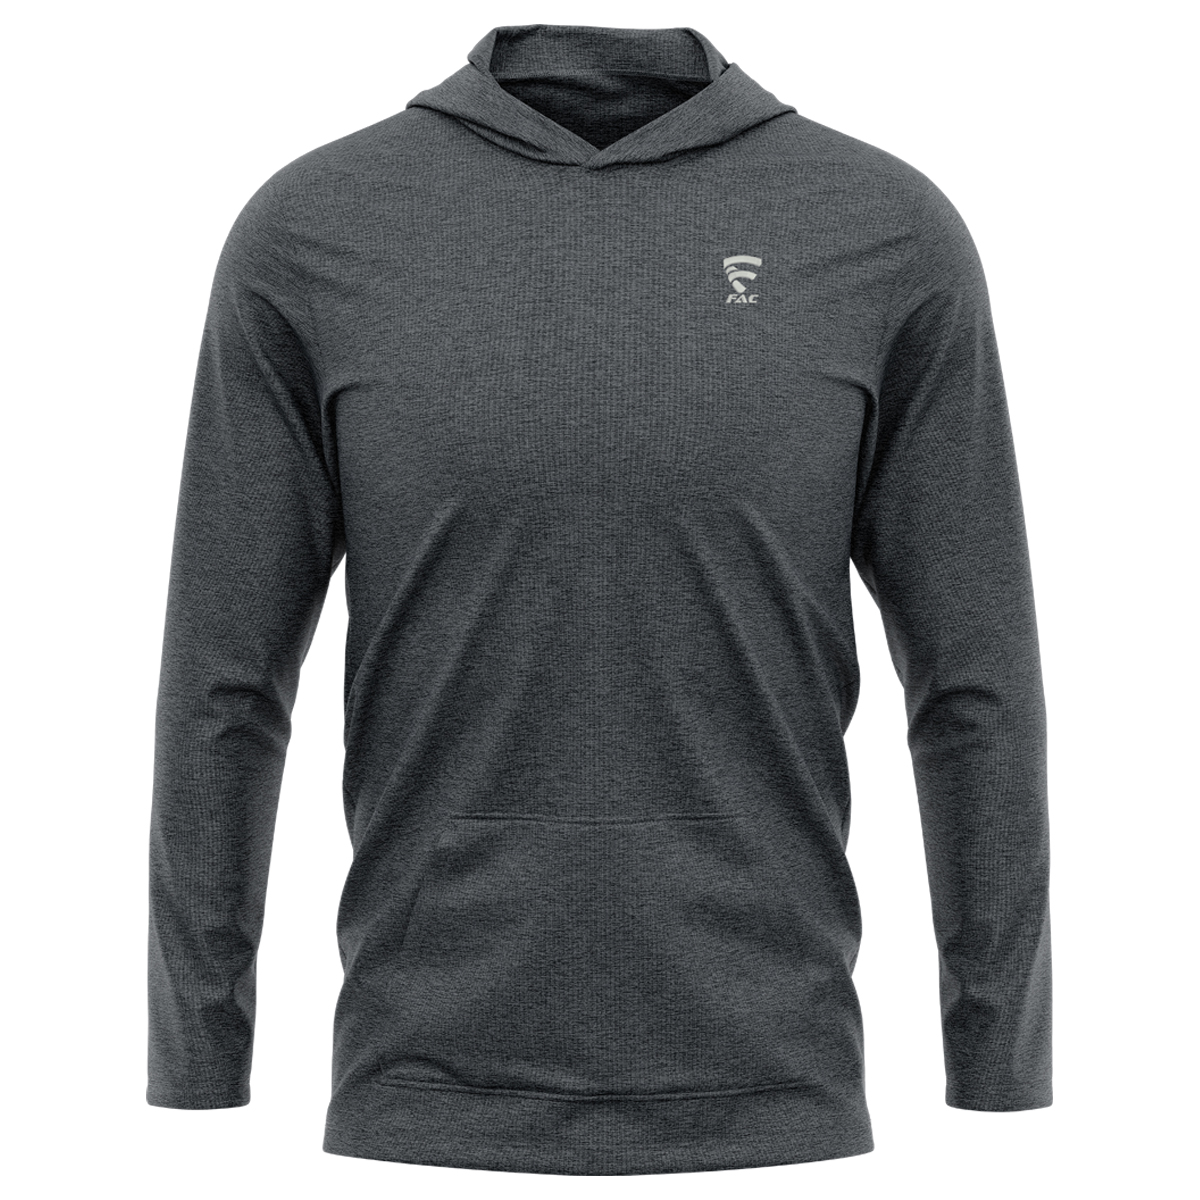 Compression Fit Hoodie’s – First American Corporation (Pvt) Ltd